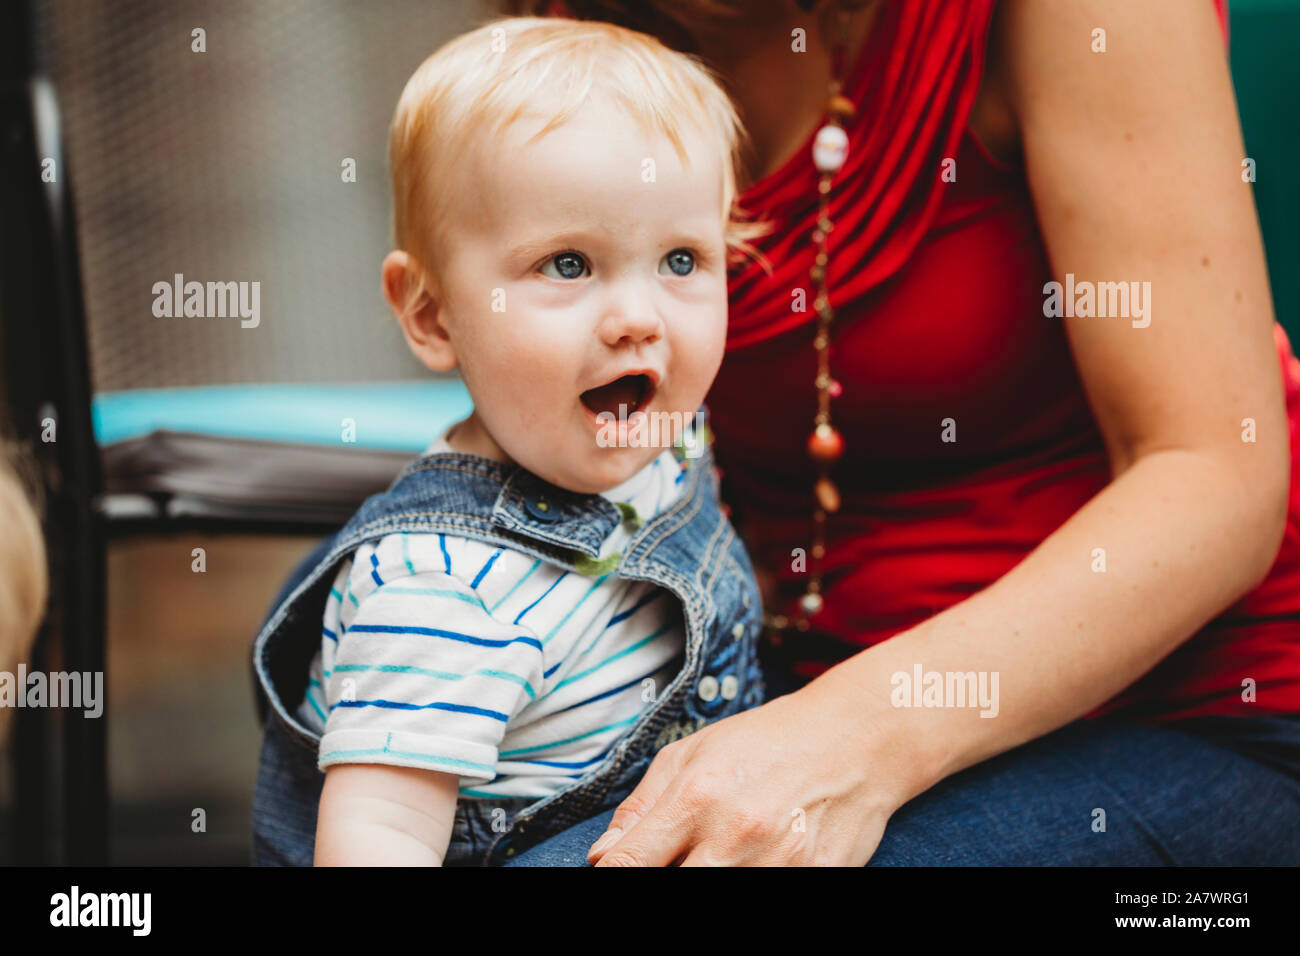 Headshot of cute baby boy standing with mother Stock Photo